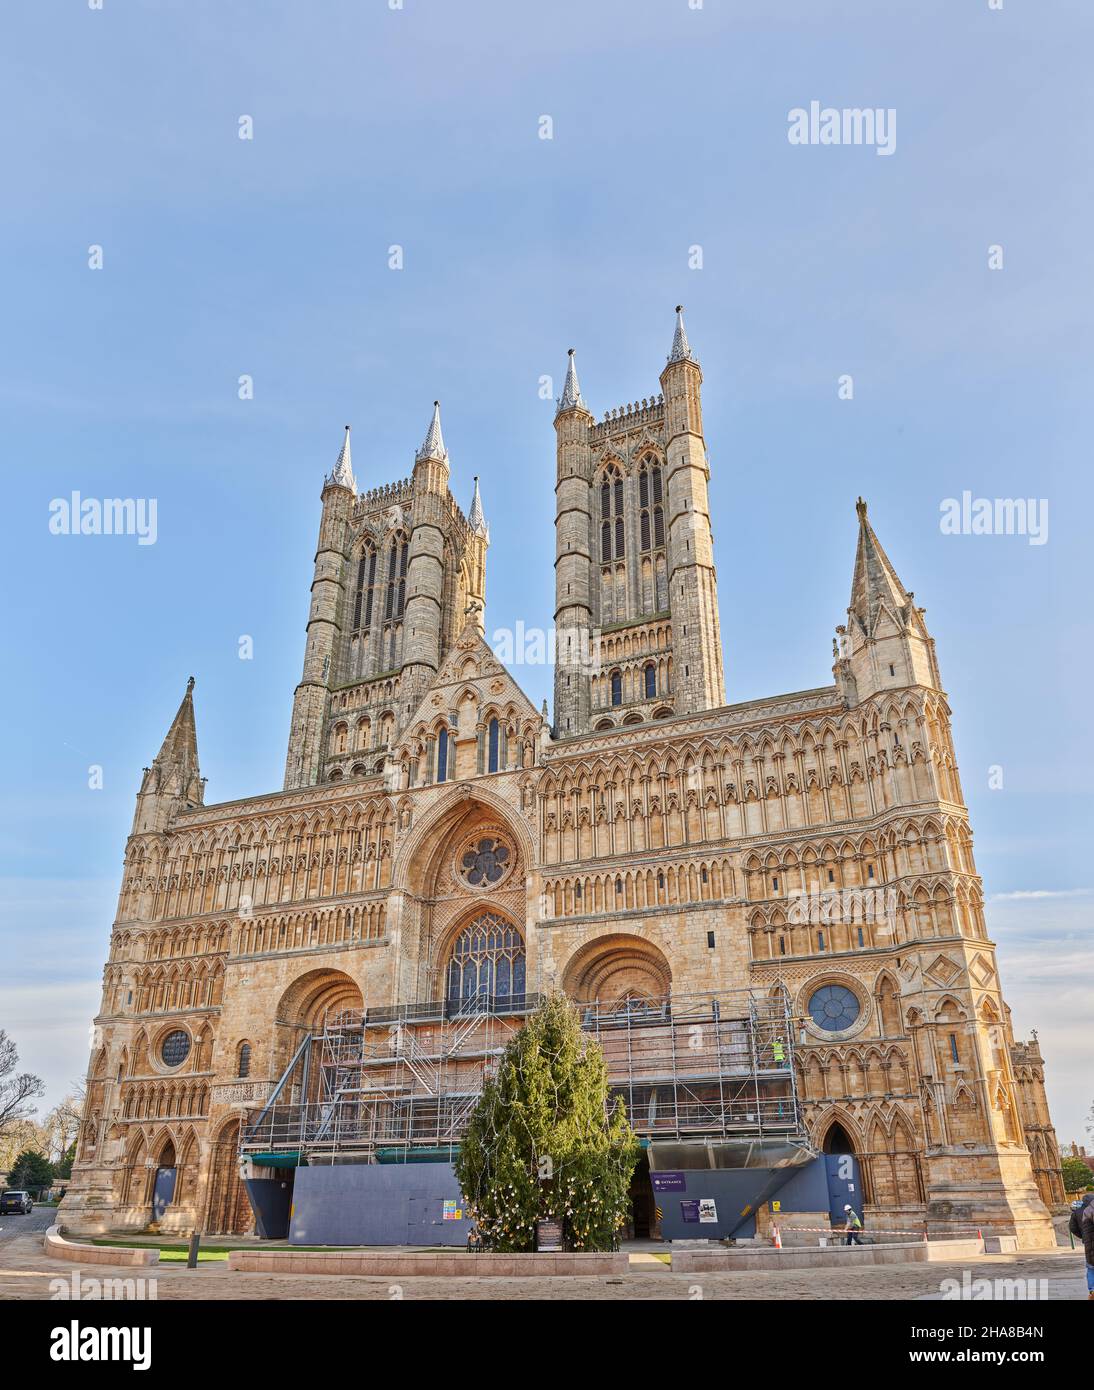 Refurbishment on the west front and towers of the medieval cathedral at Lincoln, England, christmas, 2021. Stock Photo